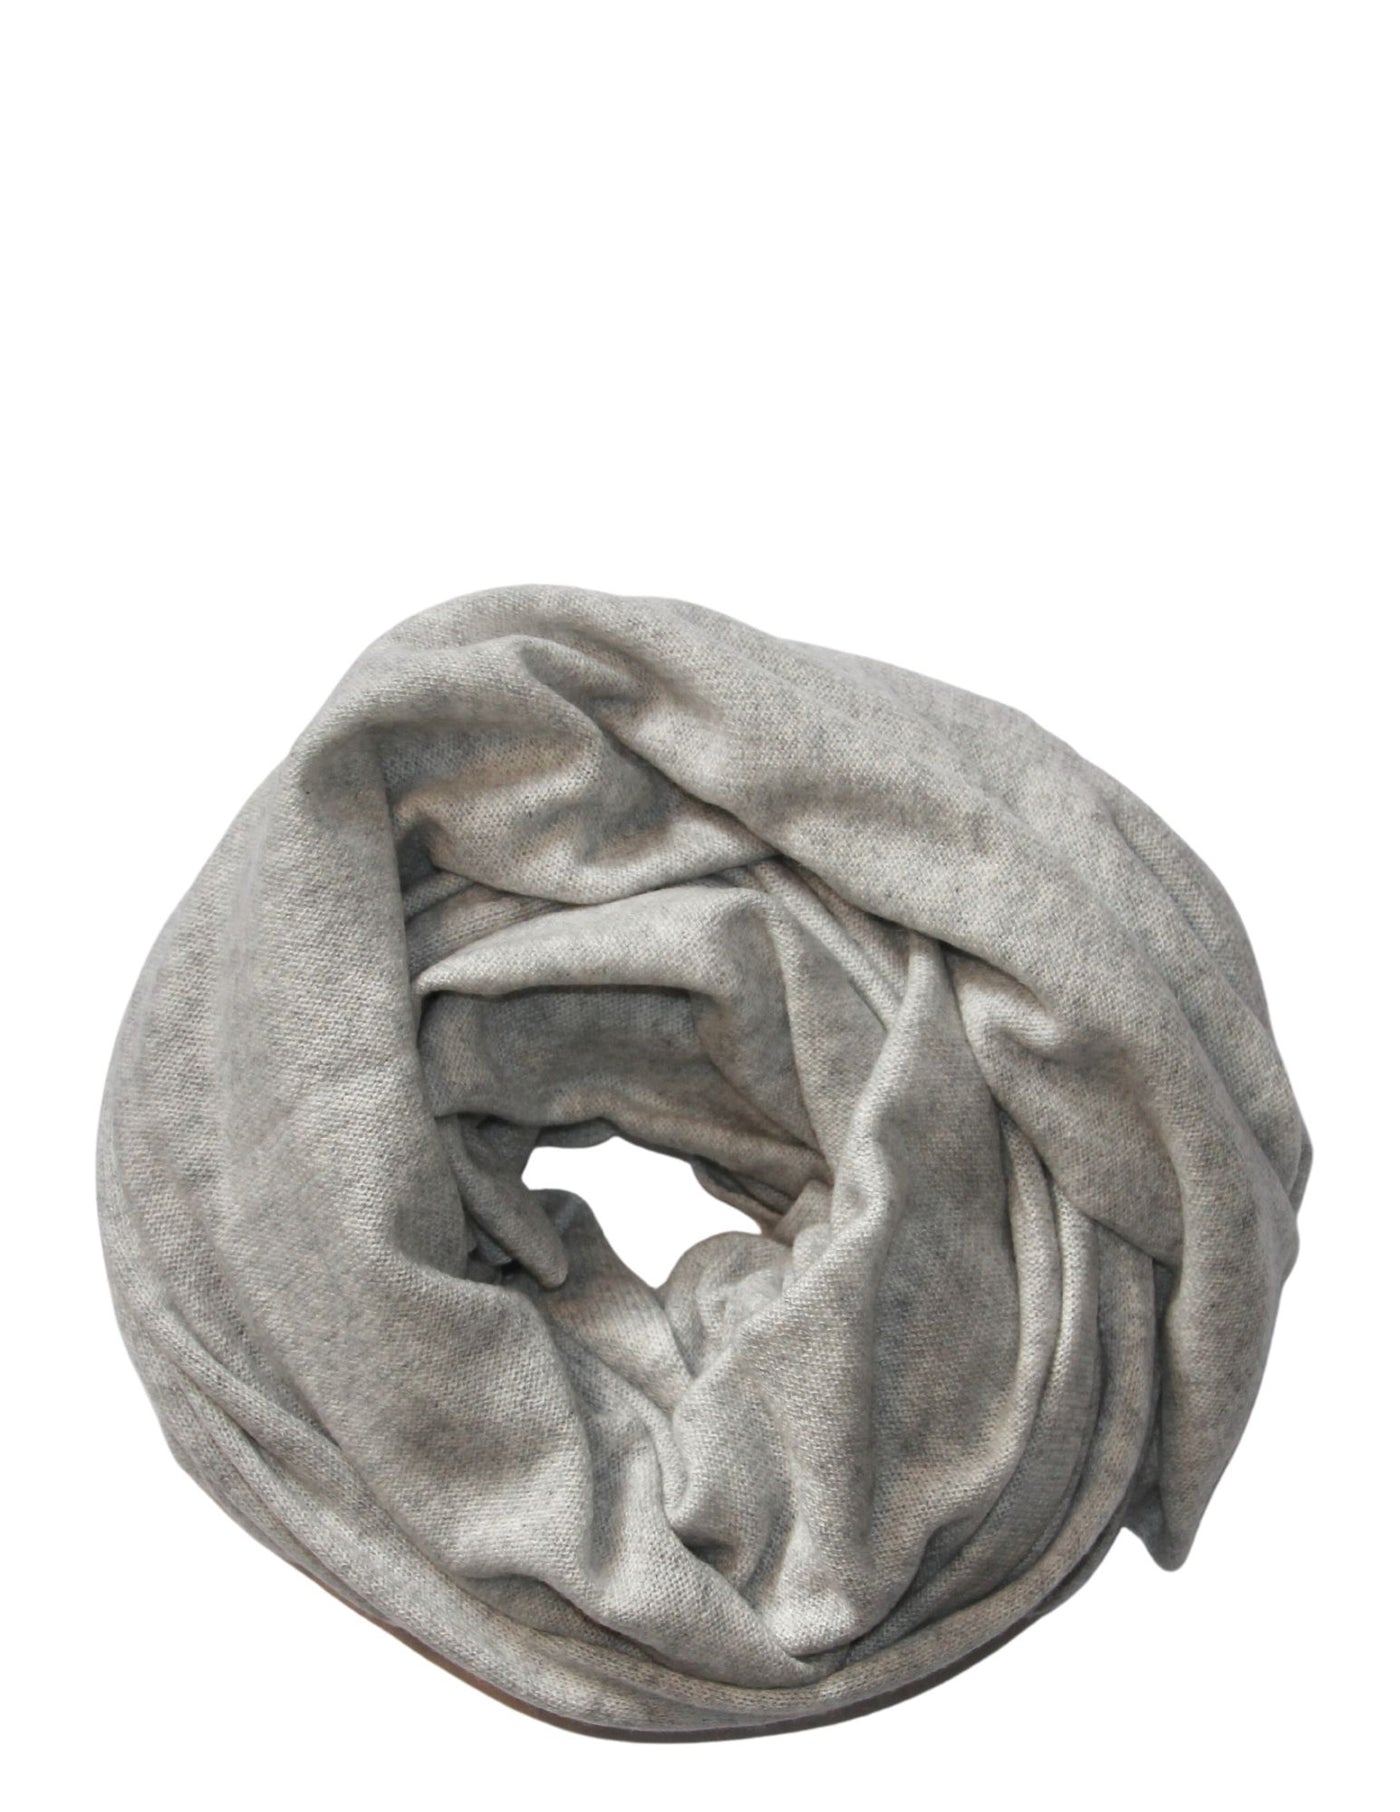 The Cashmere Travel Wrap Foggy